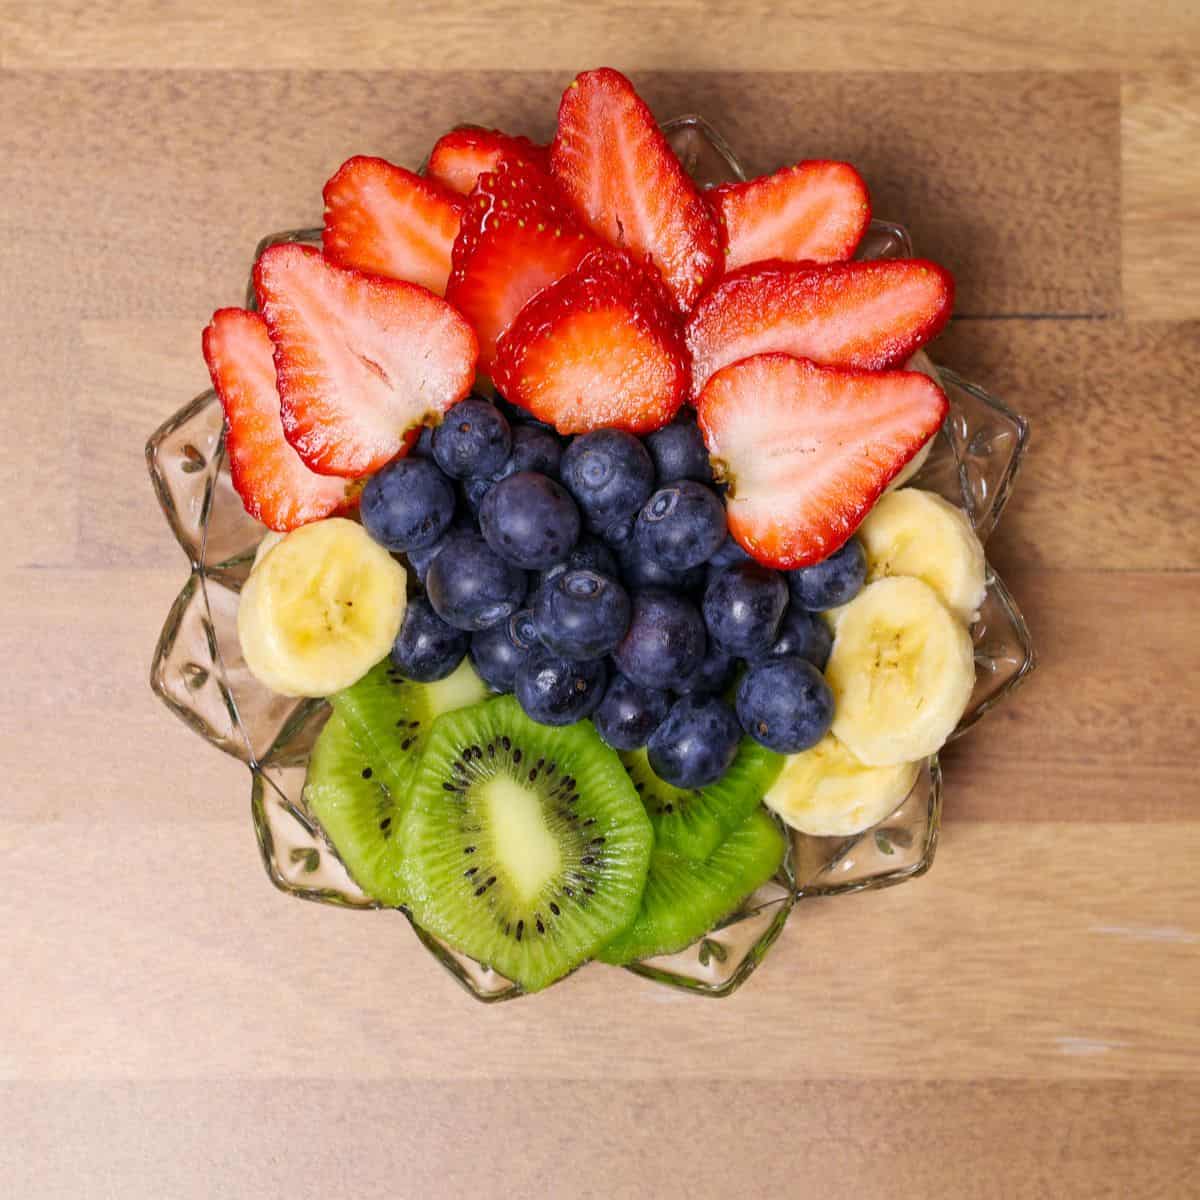 An assortment of fresh fruits arranged on a plate, prepared as toppings for a Hawaiian açaí bowl, including sliced bananas, kiwi, strawberries, and whole blueberries